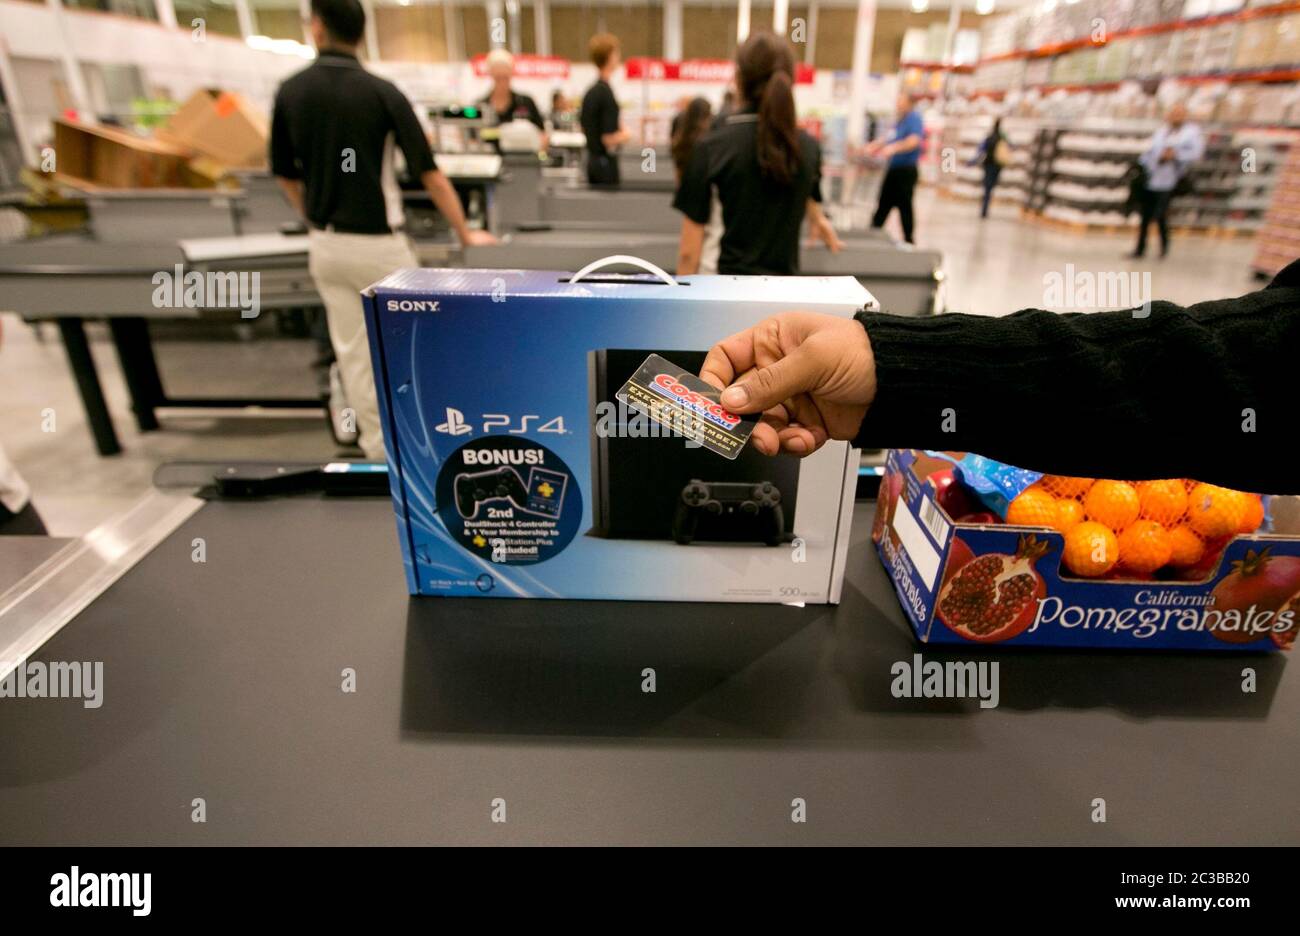 Cedar Park Texas USA, November 22 2013:Customer hands membership card to cashier at checkout line of newly opened Costco warehouse club in a fast-growing Austin suburb.   ©Marjorie Kamys Cotera/Daemmrich Photography Stock Photo